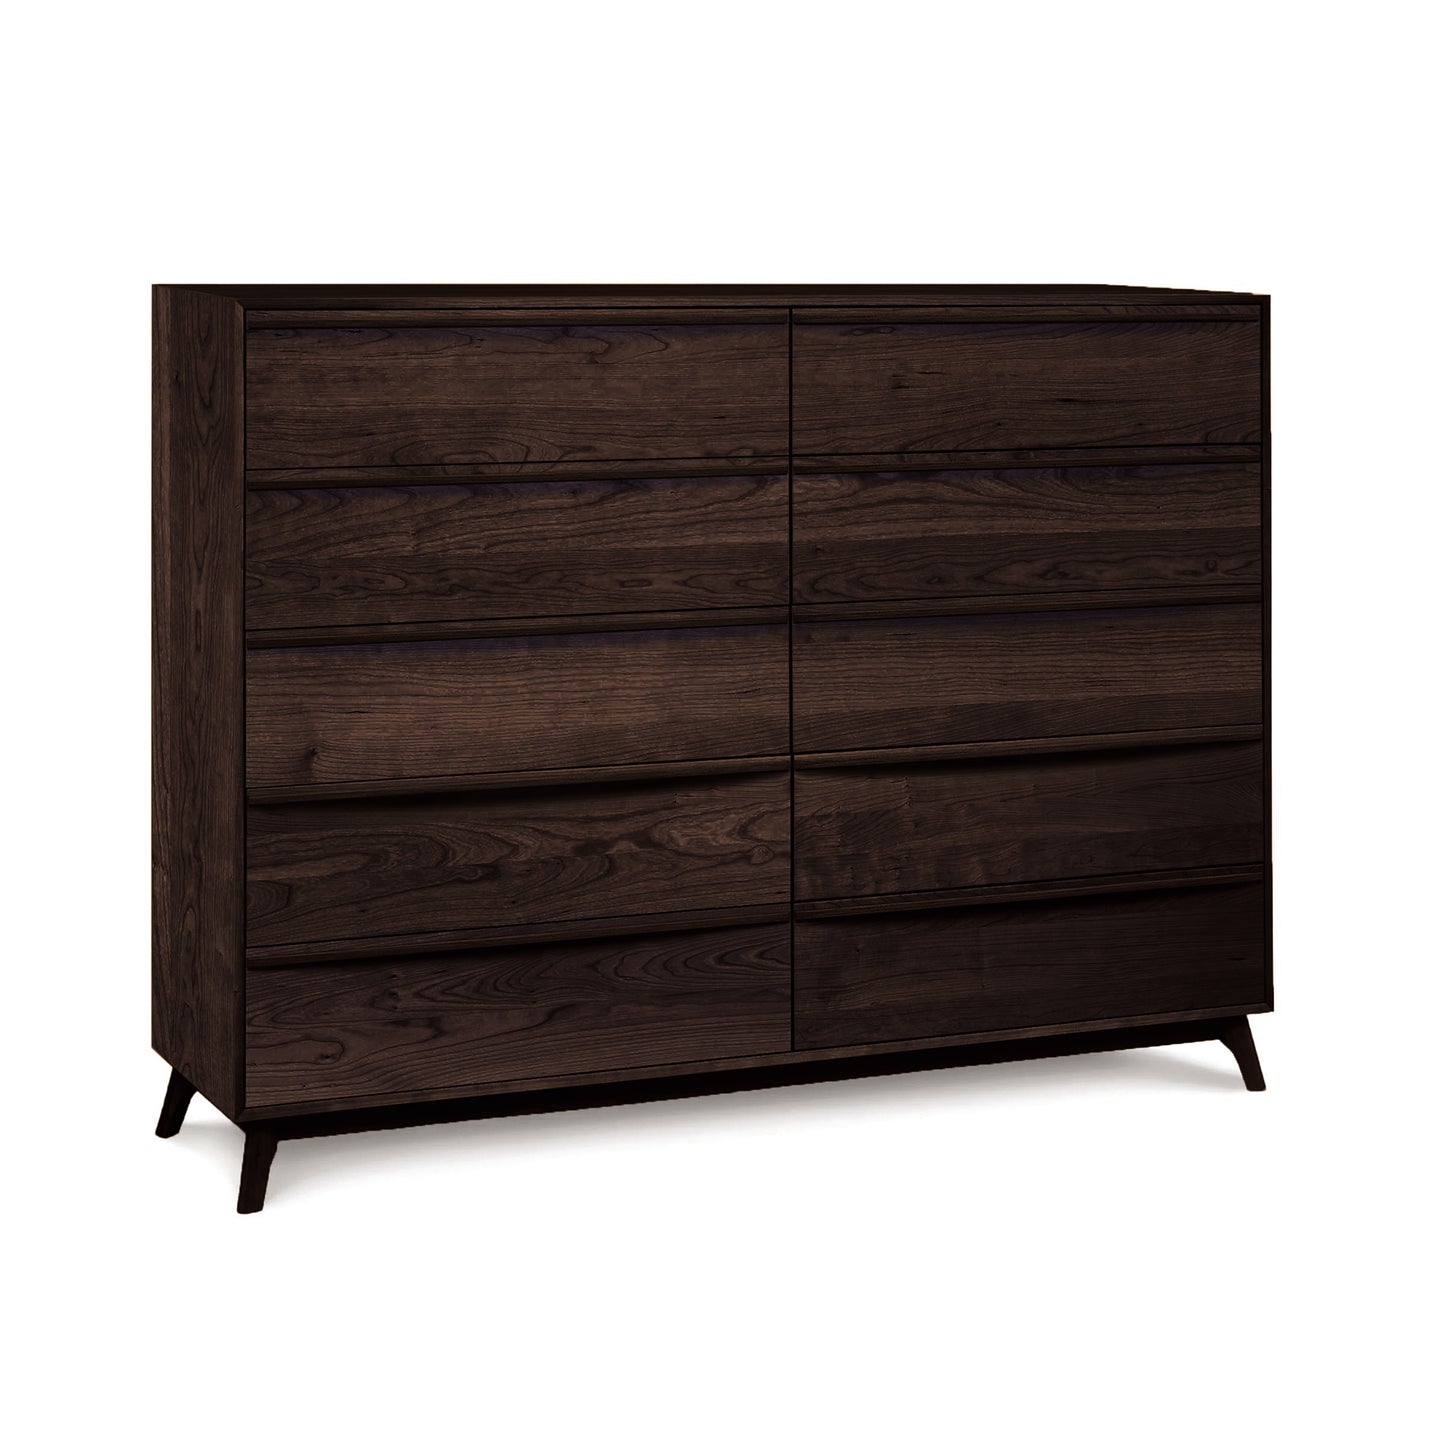 A Catalina 10-Drawer Dresser by Copeland Furniture, a mid-century modern, dark wooden dresser with six horizontal drawers on angled legs for bedroom storage.